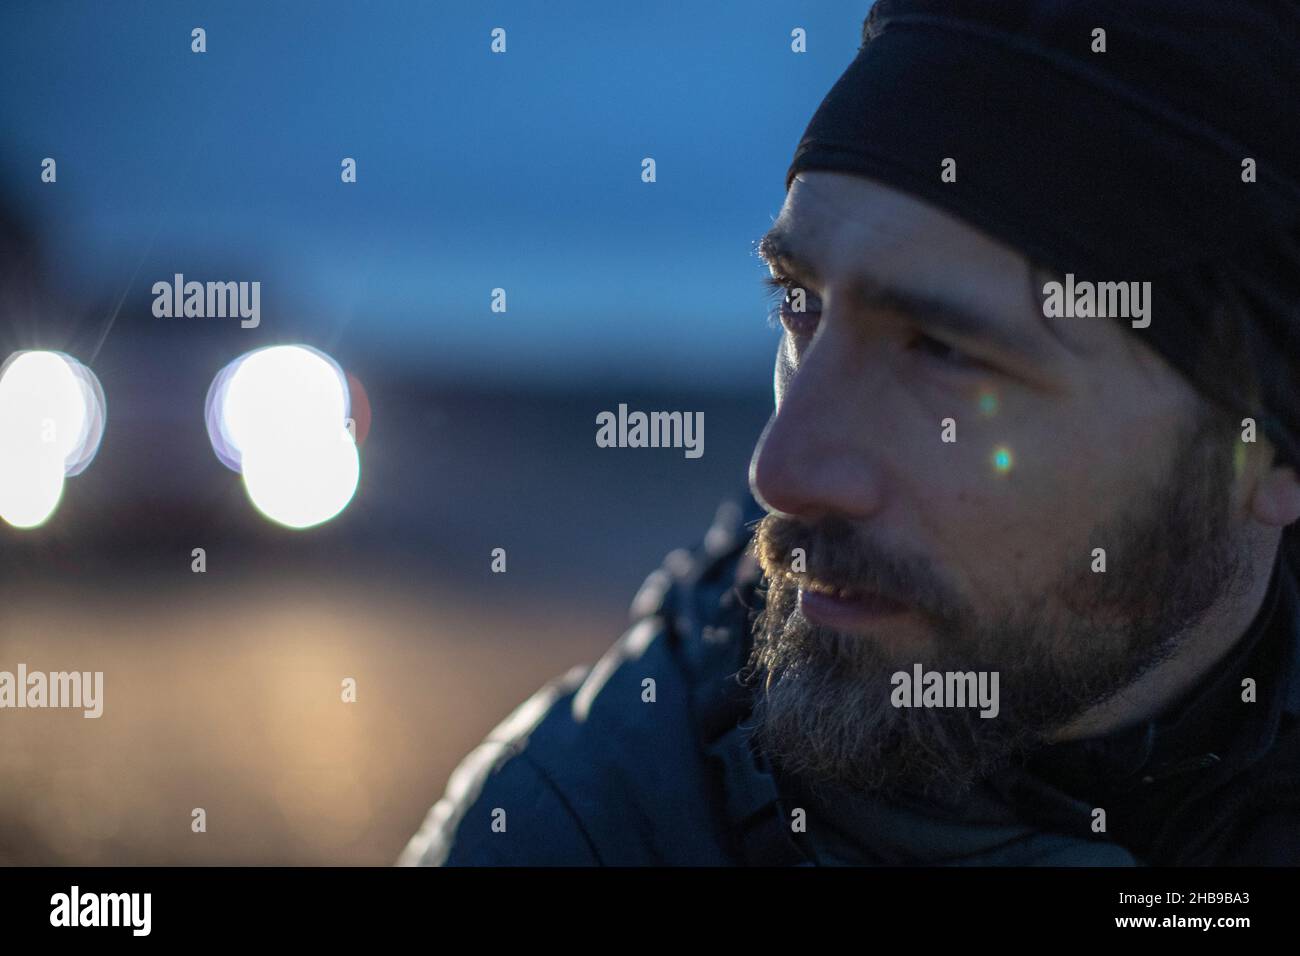 Man lost in thought, outside at dusk with car headlights in the background Stock Photo